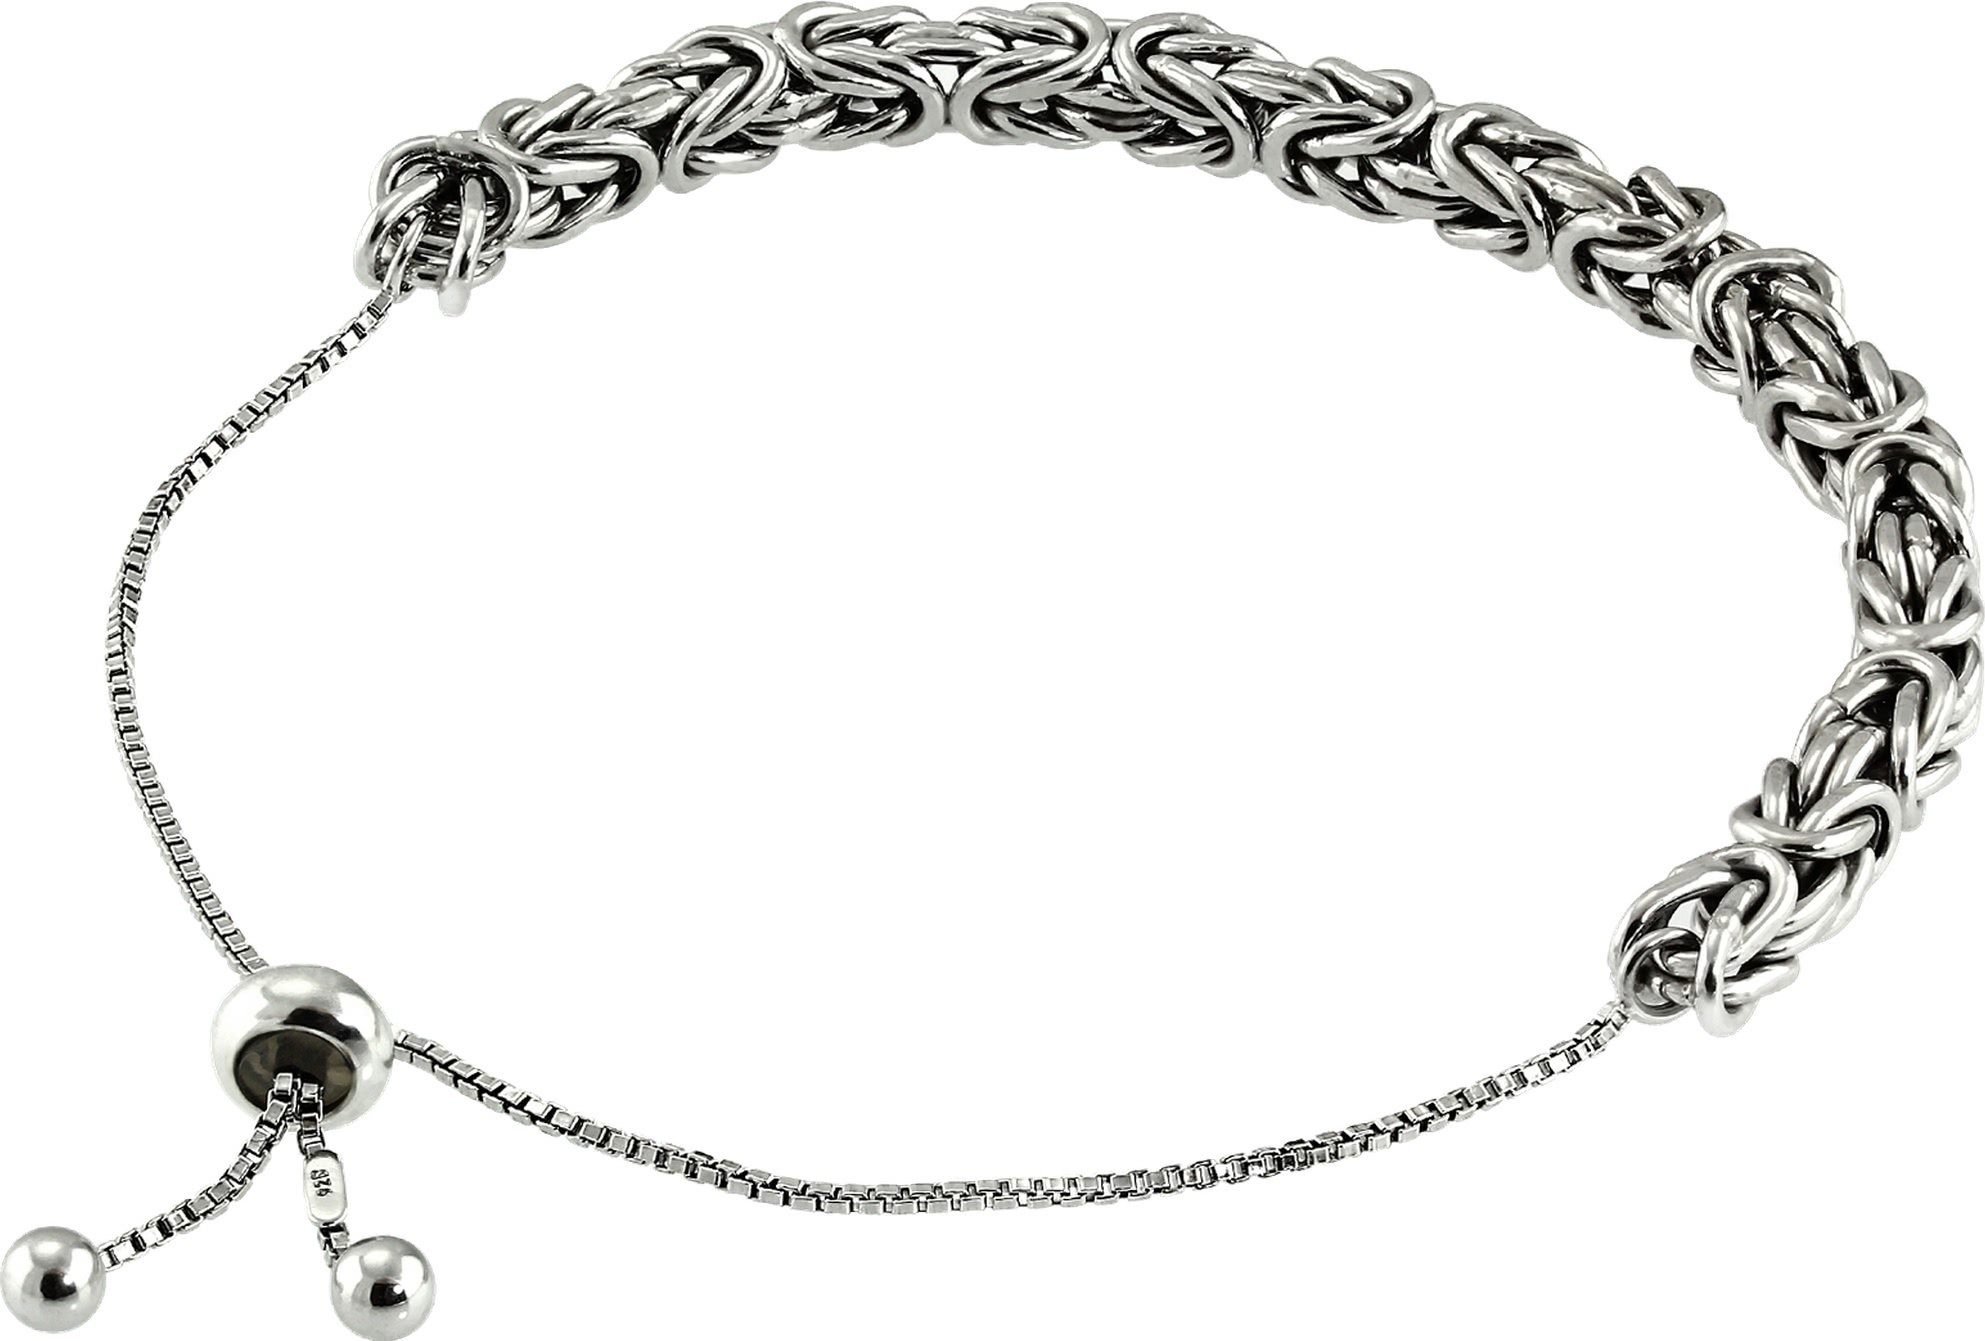 SilberDream Silberarmband SilberDream Königskette Damen ca. 24cm, (Königskette) Armband Armband 925 24cm bis Farbe: (Armband), Sterling bis Silber